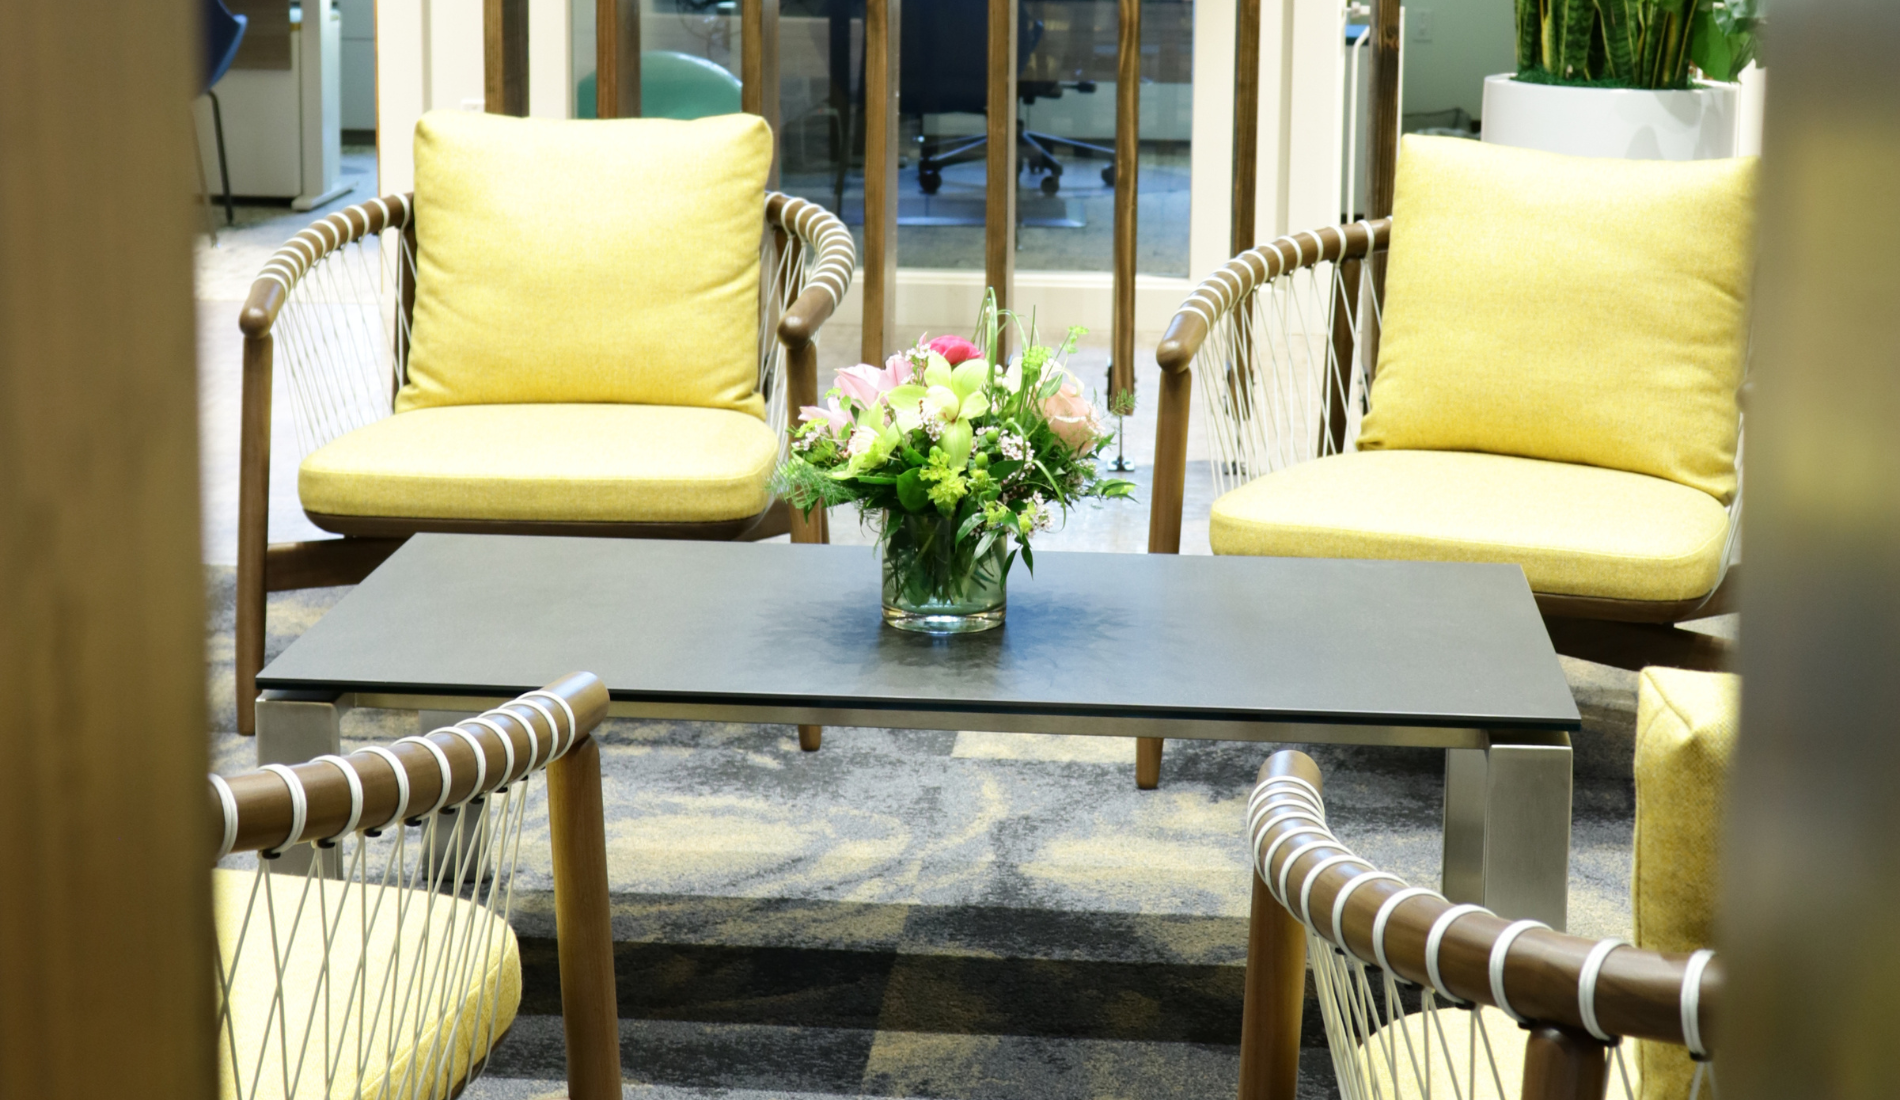 San Diego Interior Design seating area in office with yellow chairs, table, and rug